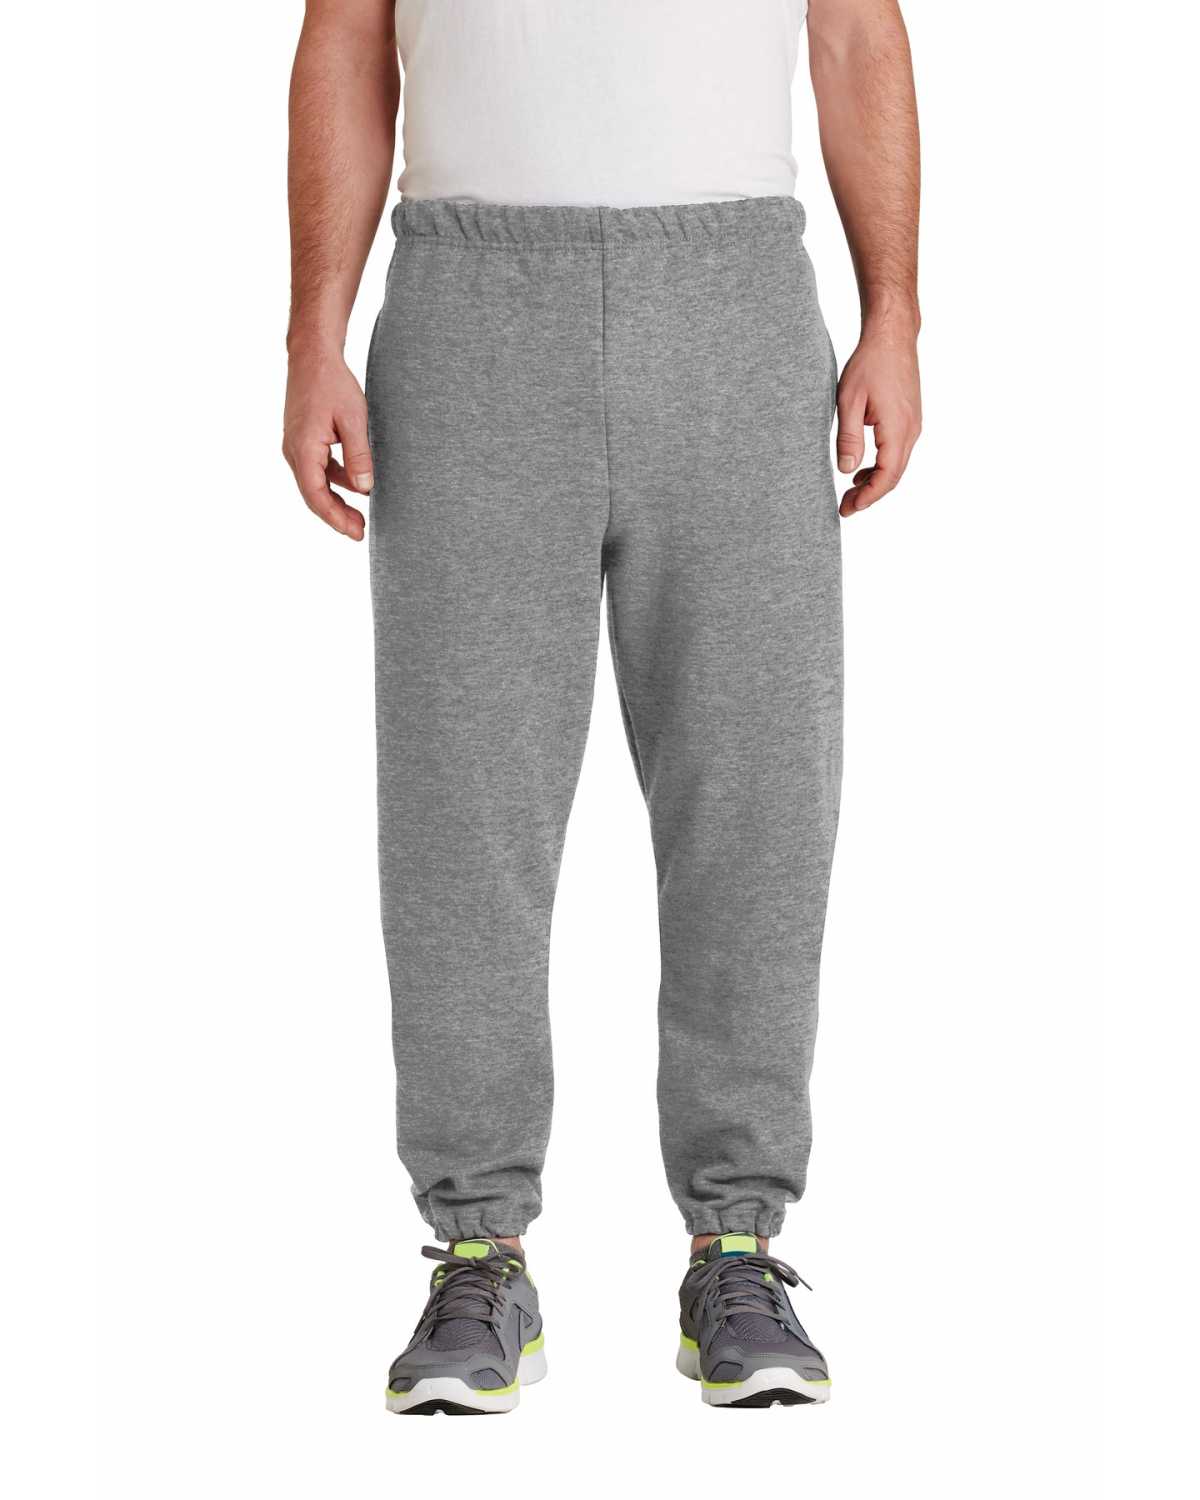 Jerzees 4850MP SUPER SWEATS NuBlend Sweatpant with Pockets on discount ...